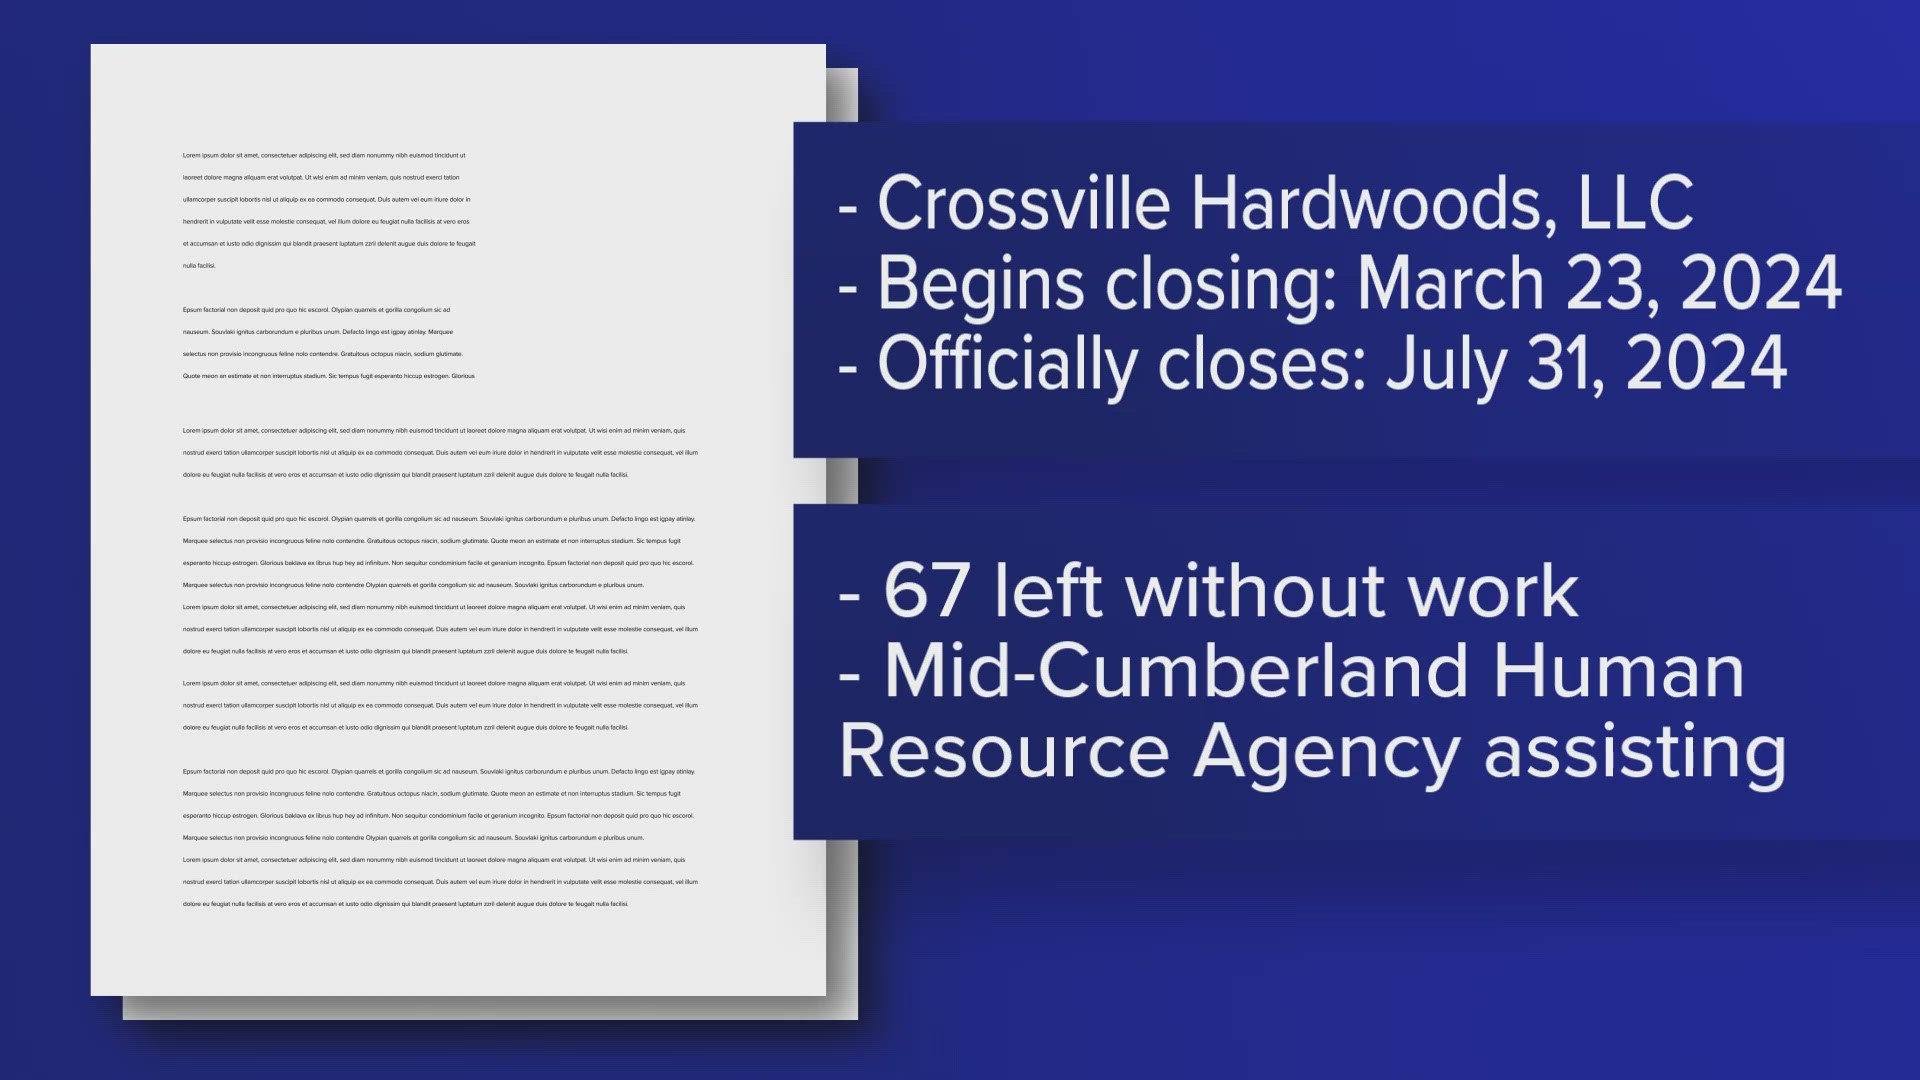 Crossville Hardwoods LLC filed a WARN notice with the department on Jan. 24, and 67 workers may lose their jobs when the company closes.